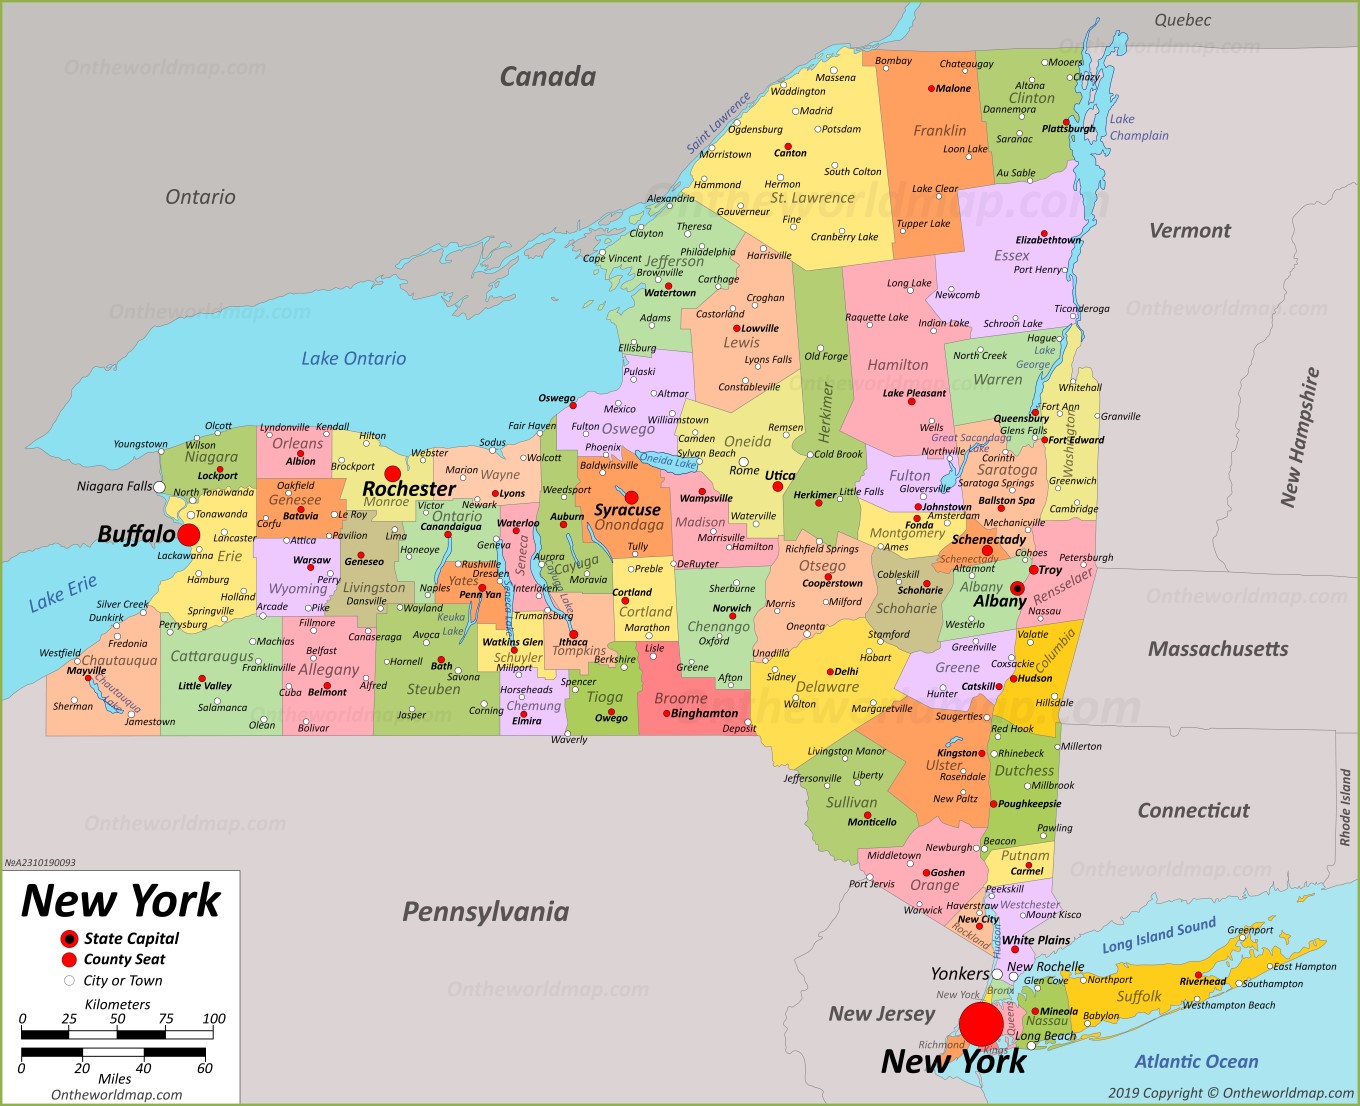 new york state map pictures New York State Maps Usa Maps Of New York Ny new york state map pictures